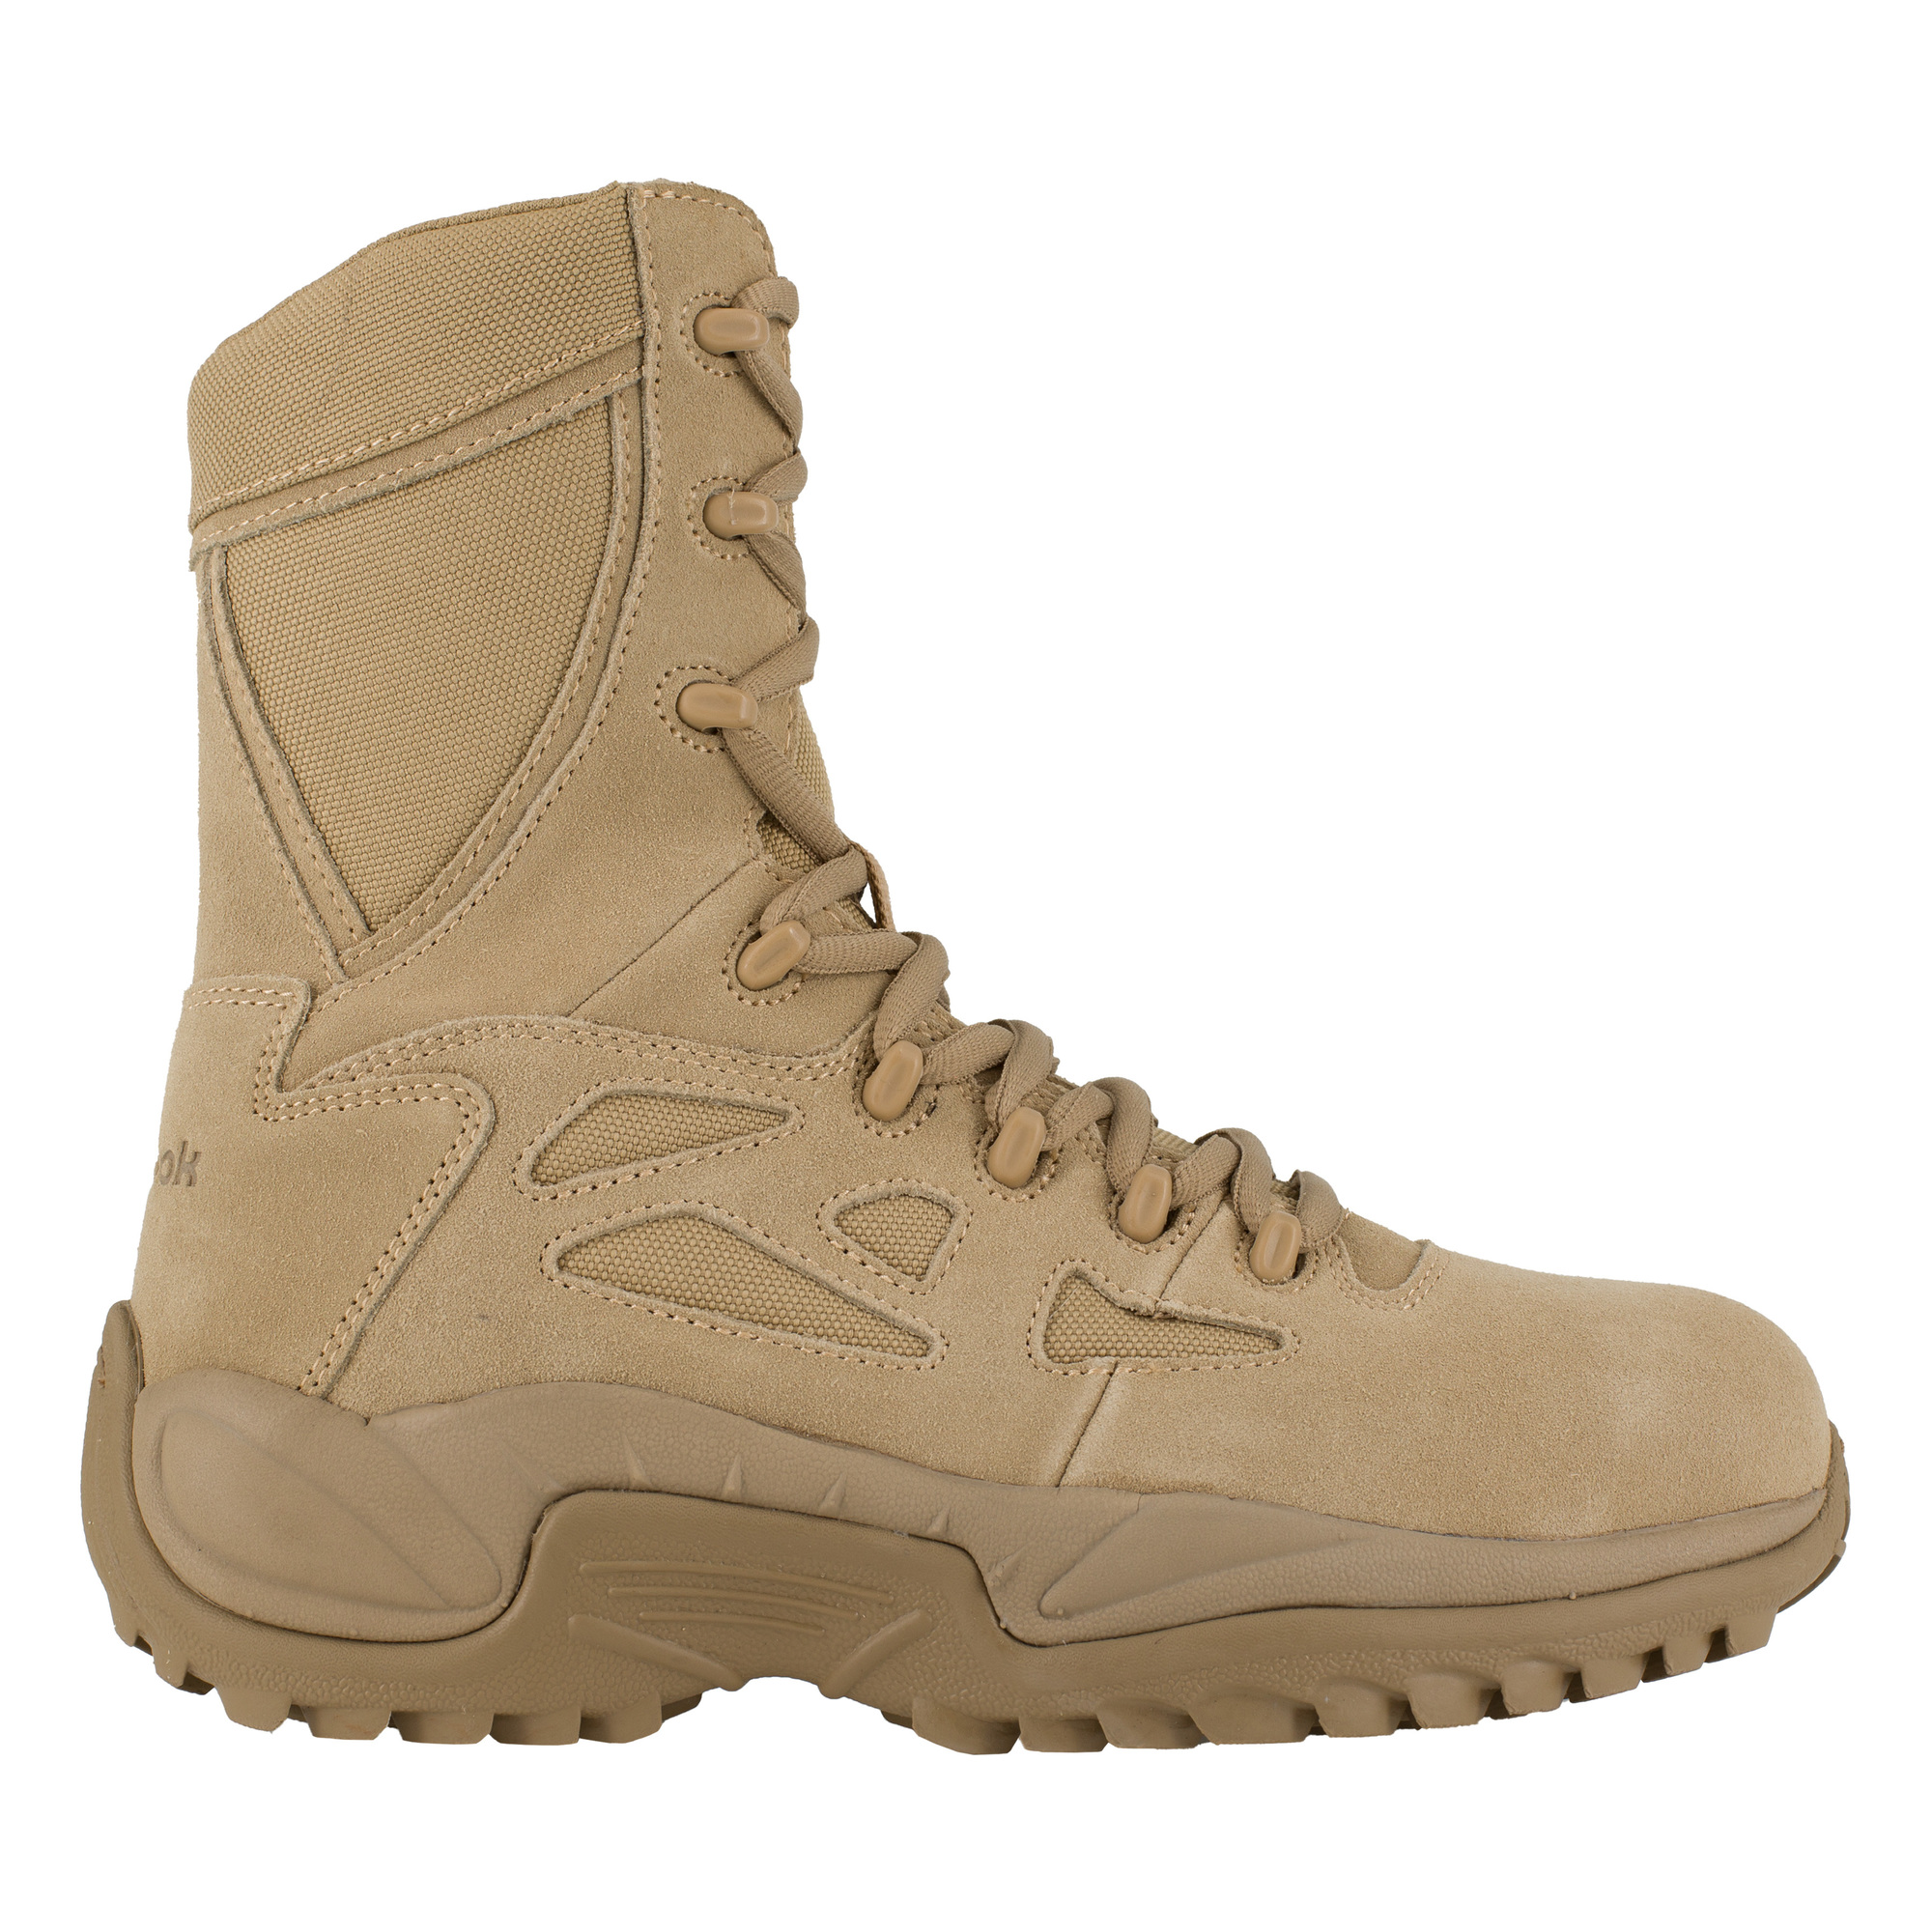 Reebok, 8Inch Stealth Tactical Boot with Side Zipper, Size 9, Width Wide, Color Desert Tan, Model RB894 -  RB894-W-09.0